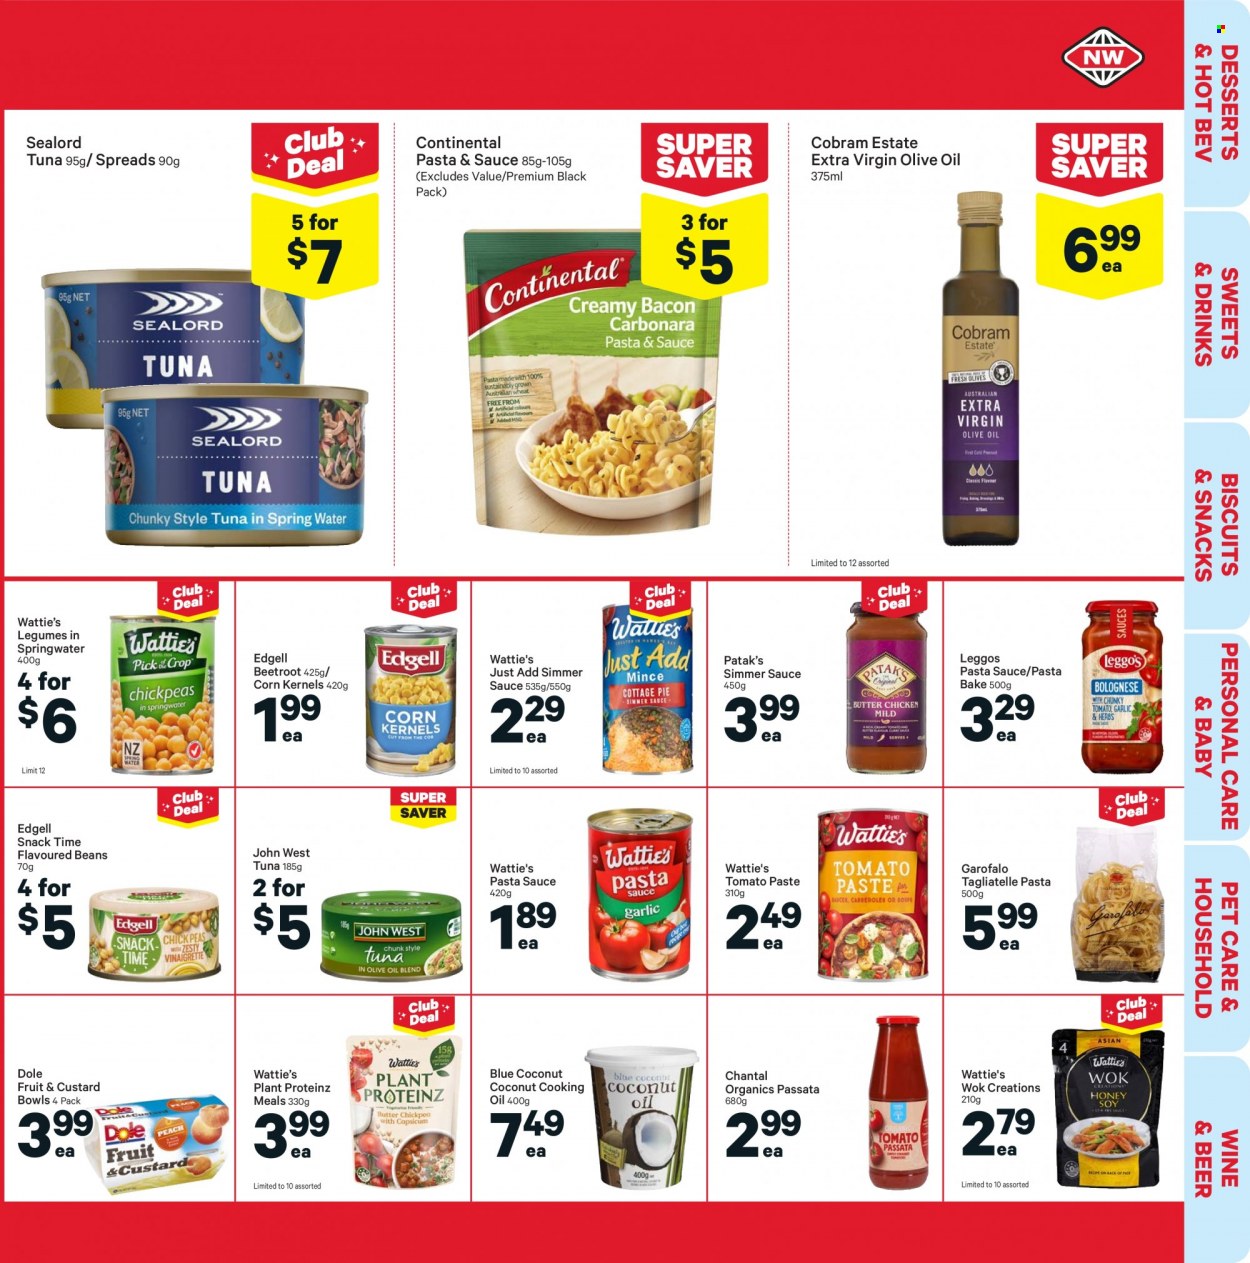 thumbnail - New World mailer - 11.10.2021 - 17.10.2021 - Sales products - beans, corn, Dole, coconut, tuna, Sealord, pasta sauce, Wattie's, Continental, snack, biscuit, tomato paste, sealord tuna, extra virgin olive oil, olive oil, oil, beer, wok. Page 13.